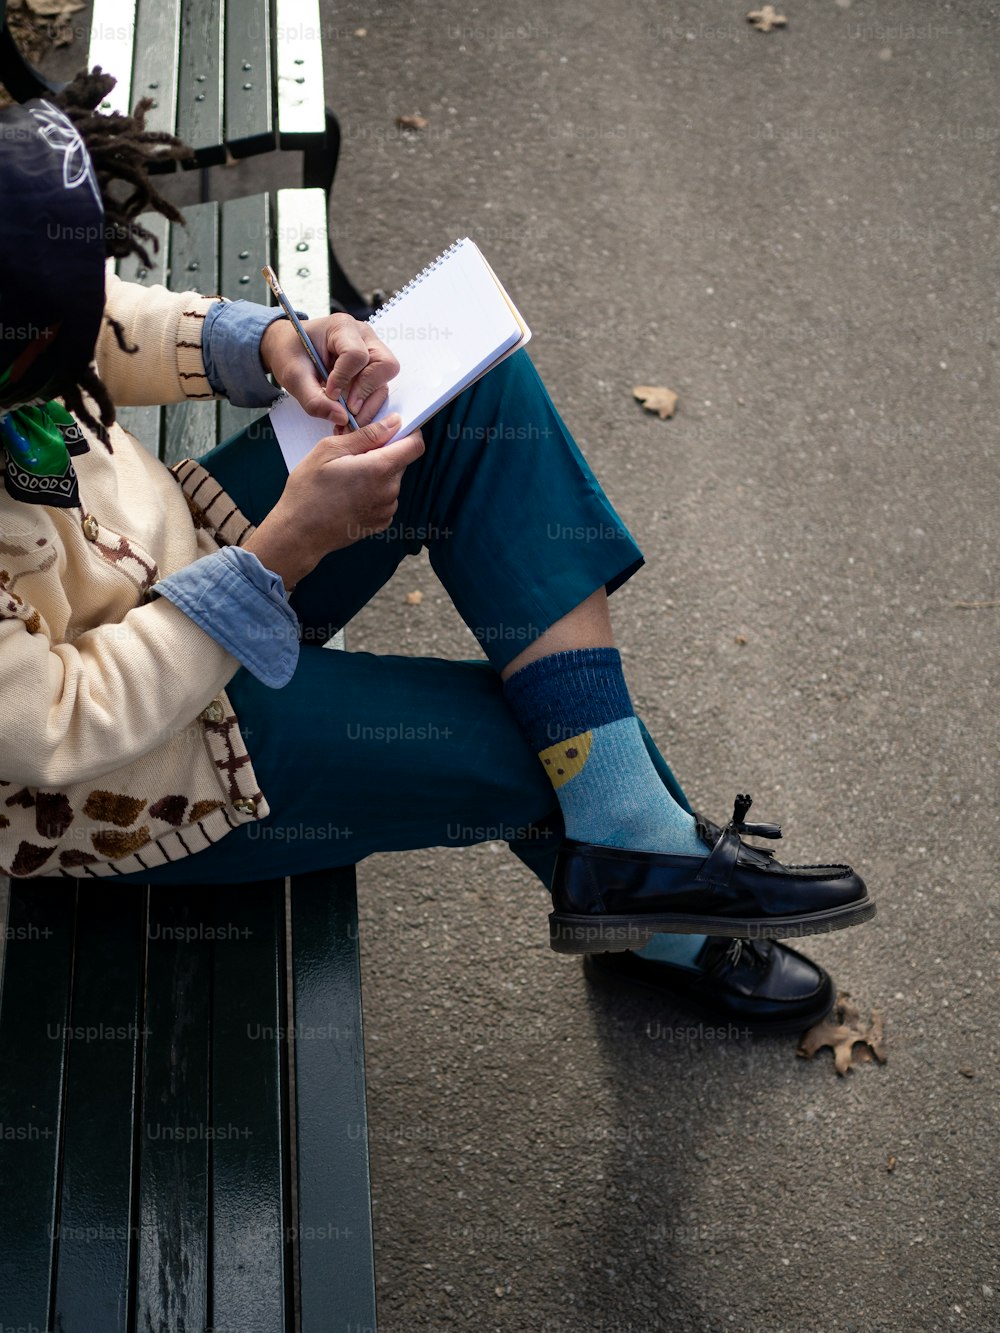 a person sitting on a bench writing on a piece of paper